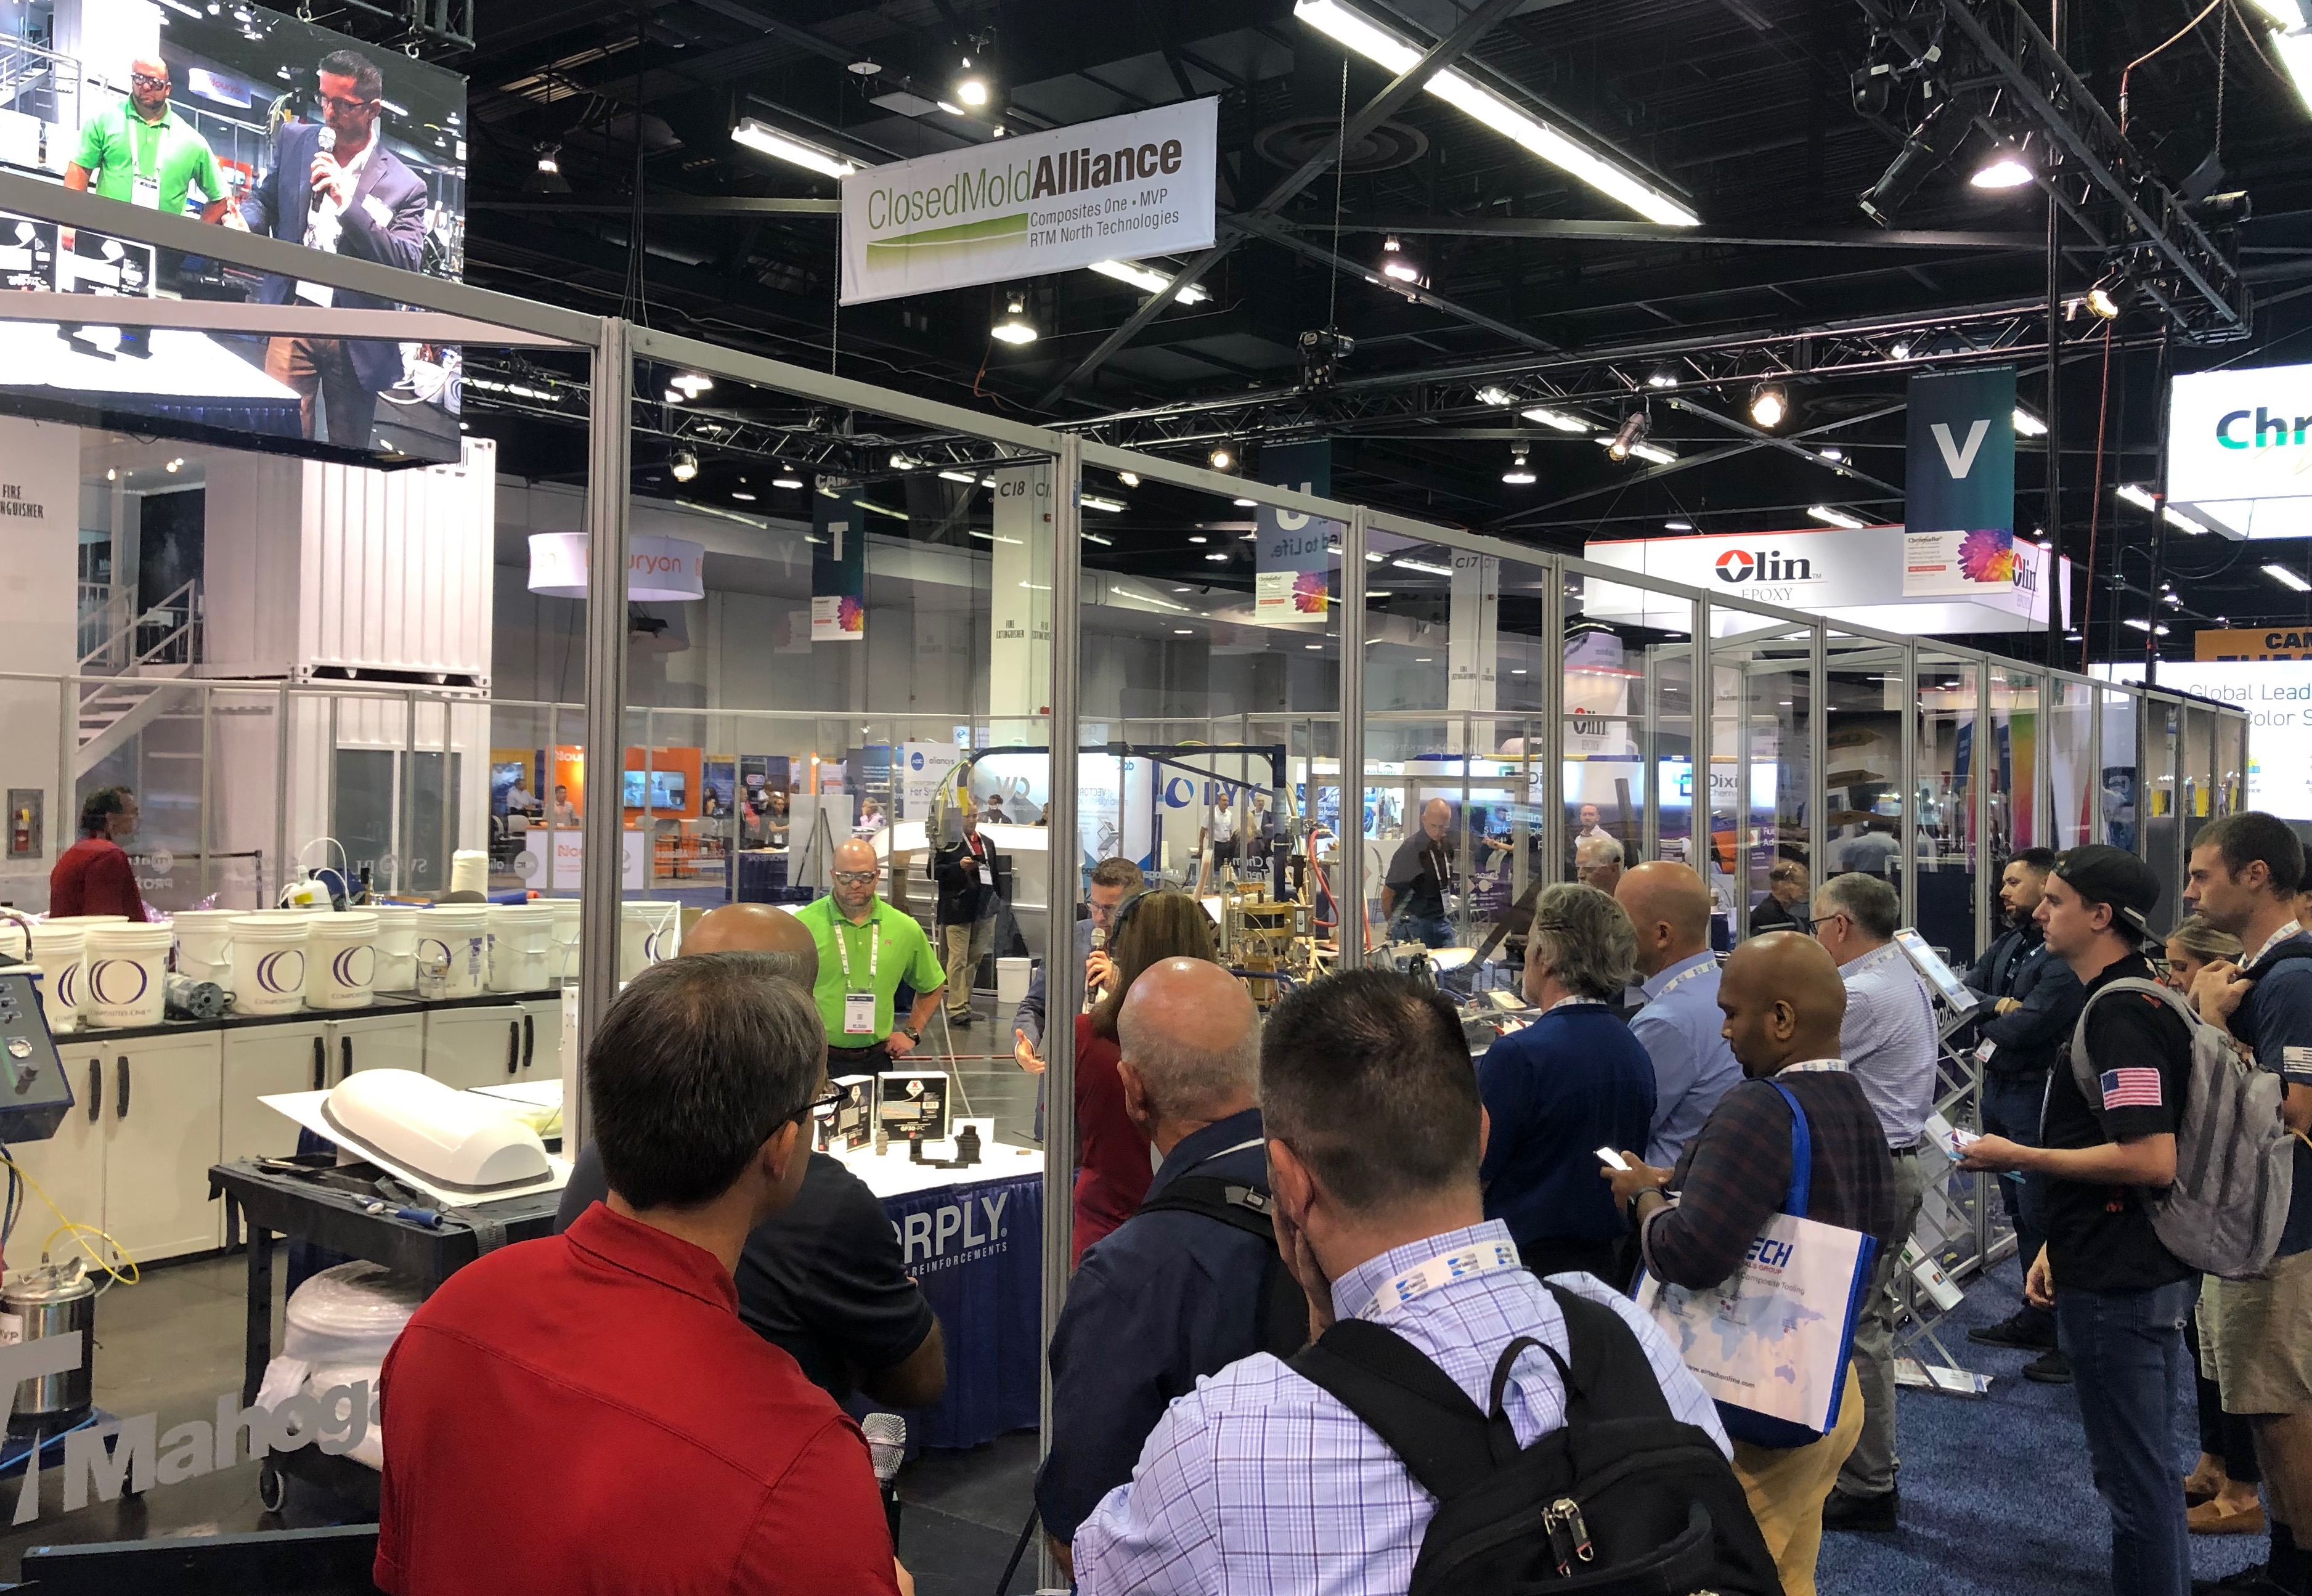 Demos taking place in the 2019 show.